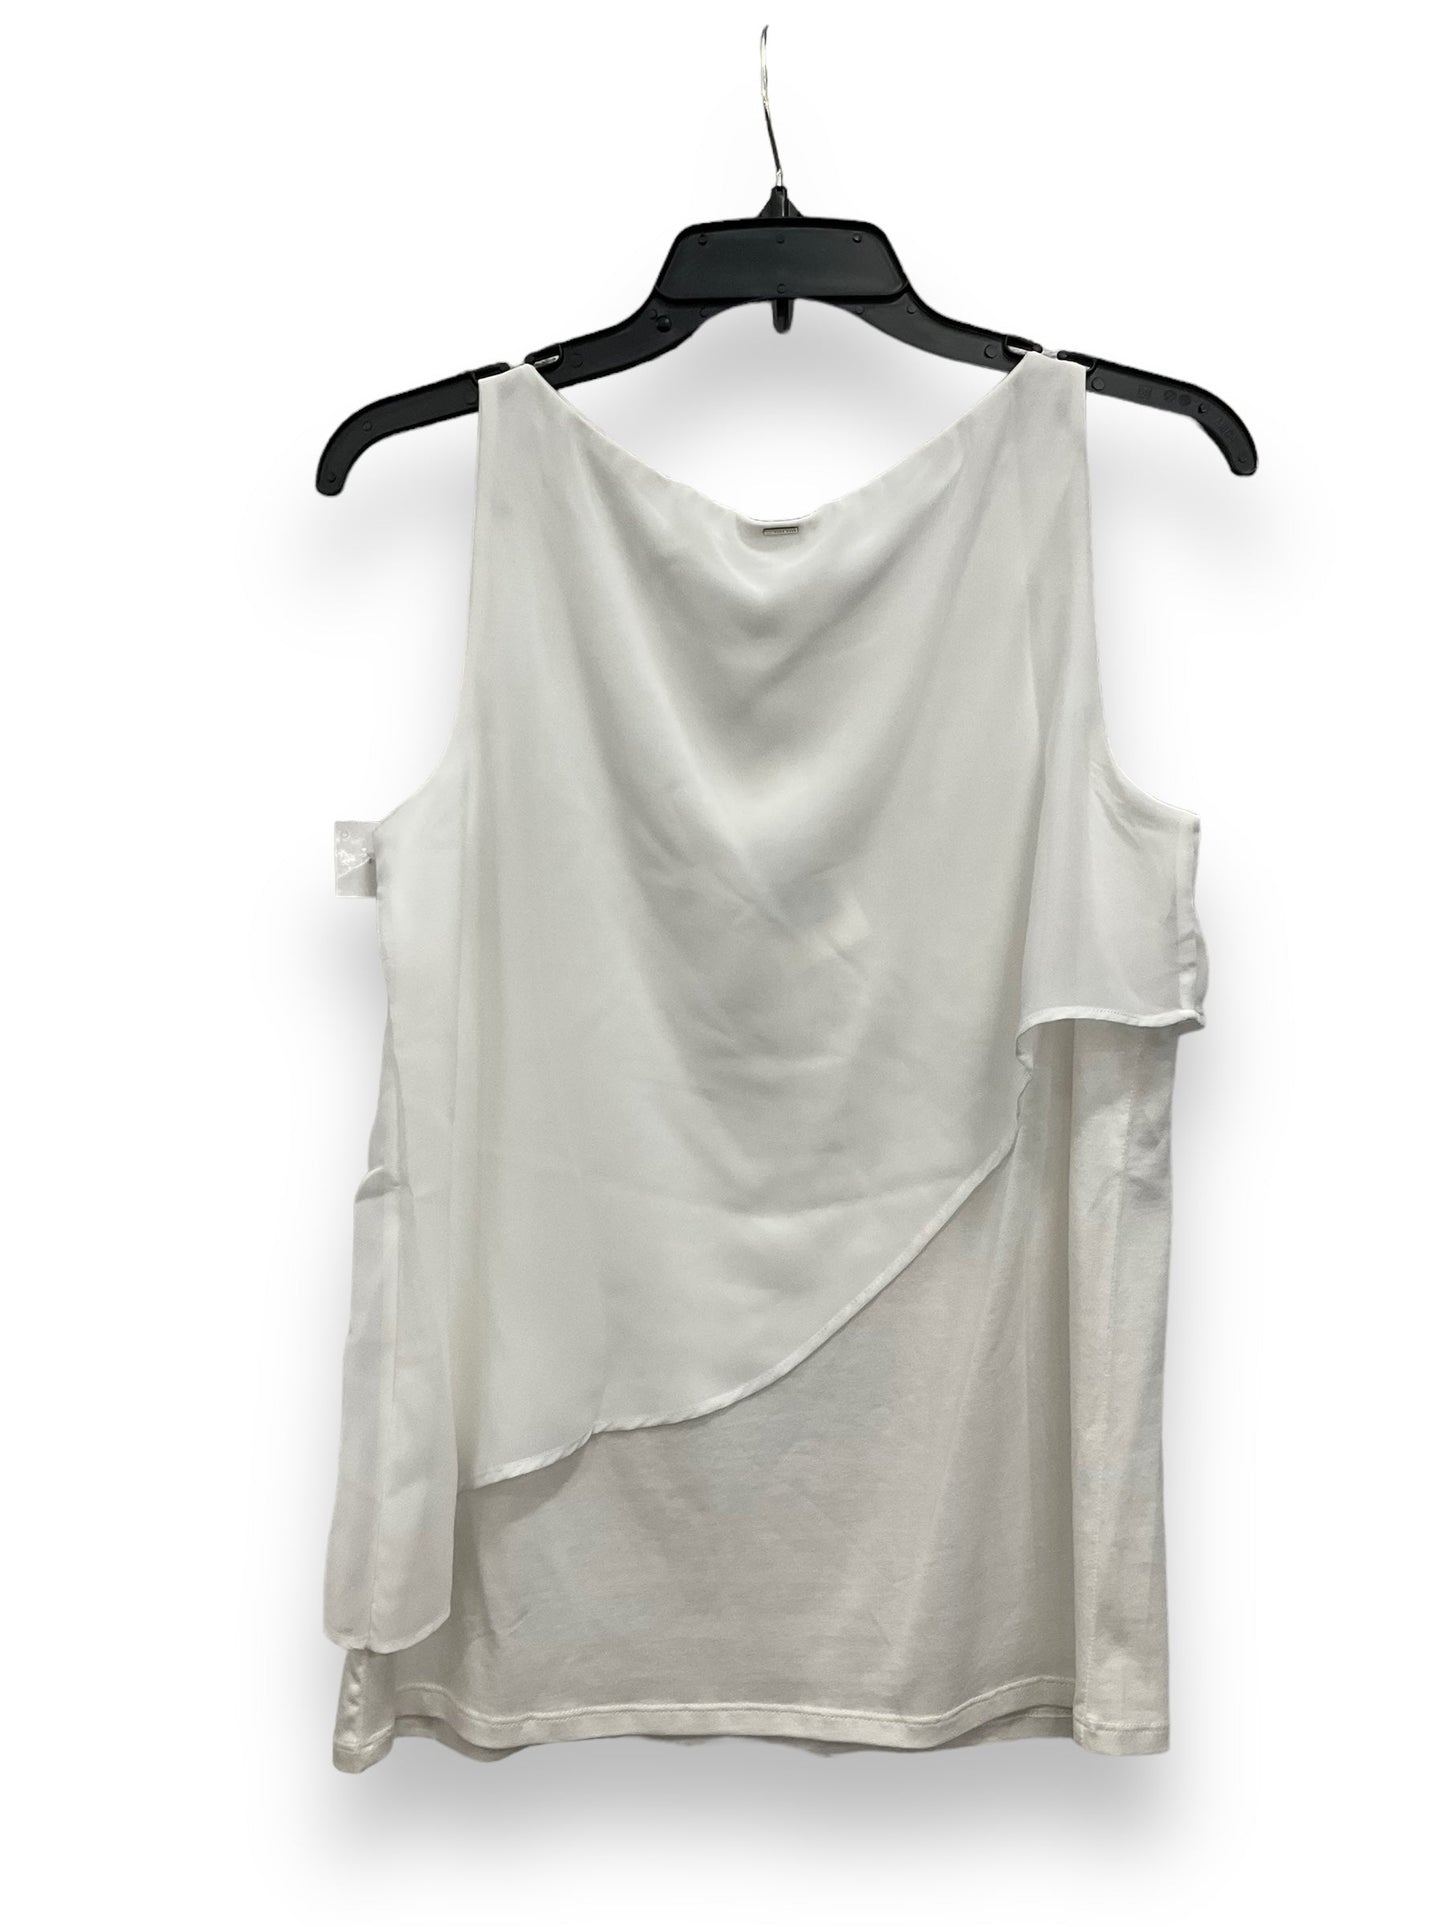 White Top Sleeveless Cmb, Size S